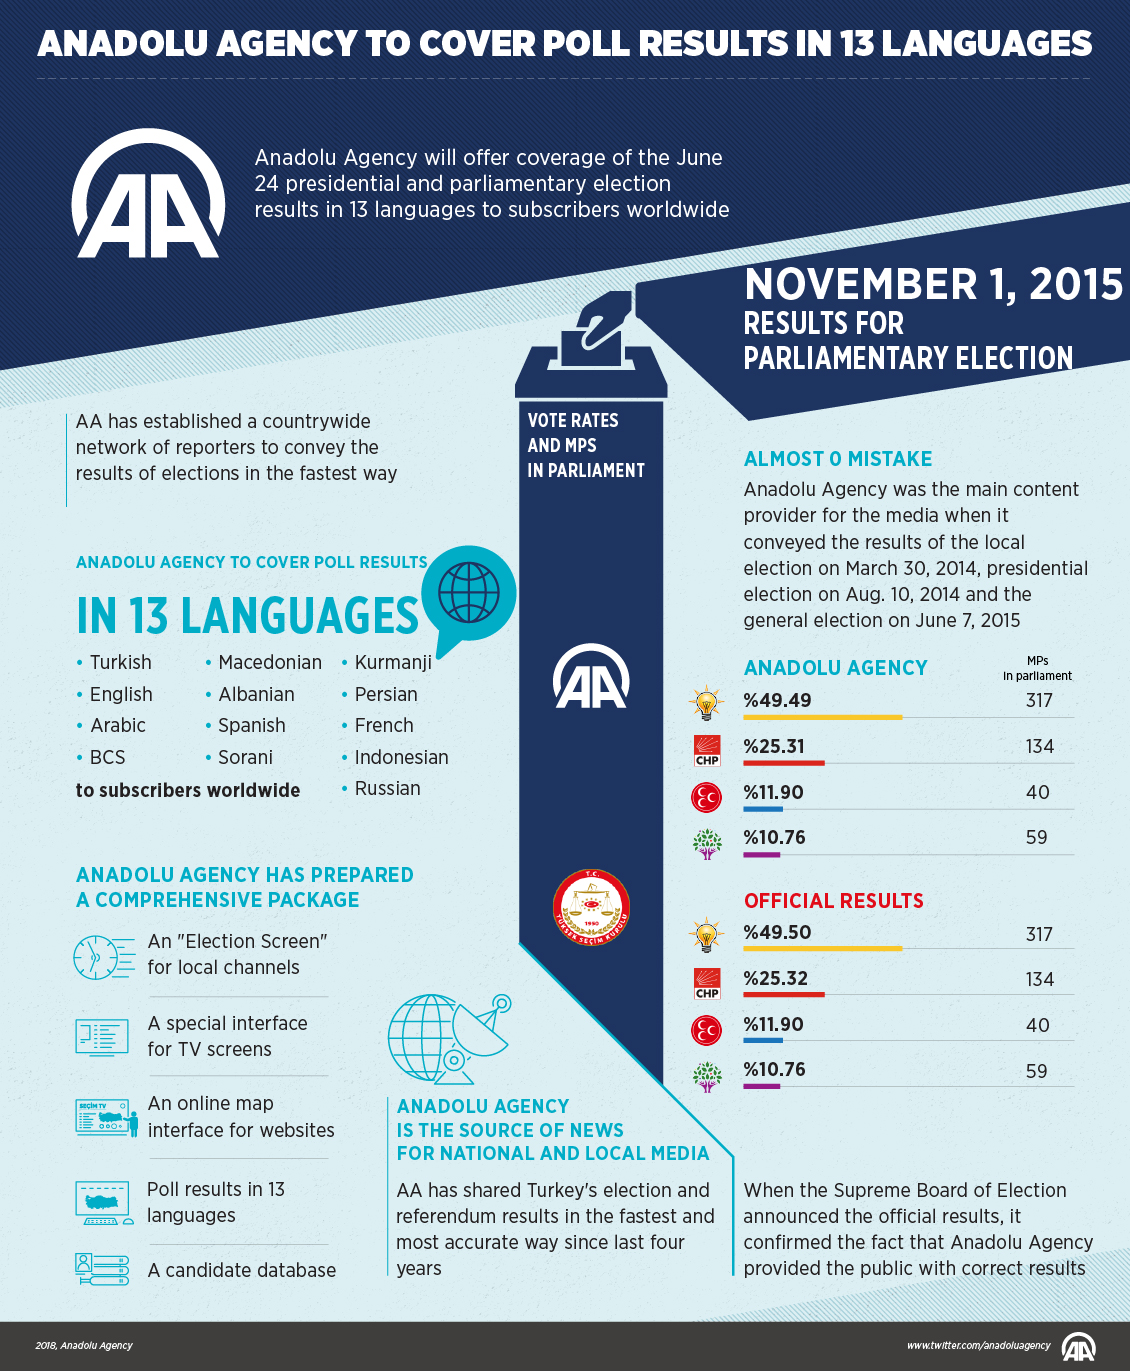 Anadolu Agency to cover poll results in 13 languages